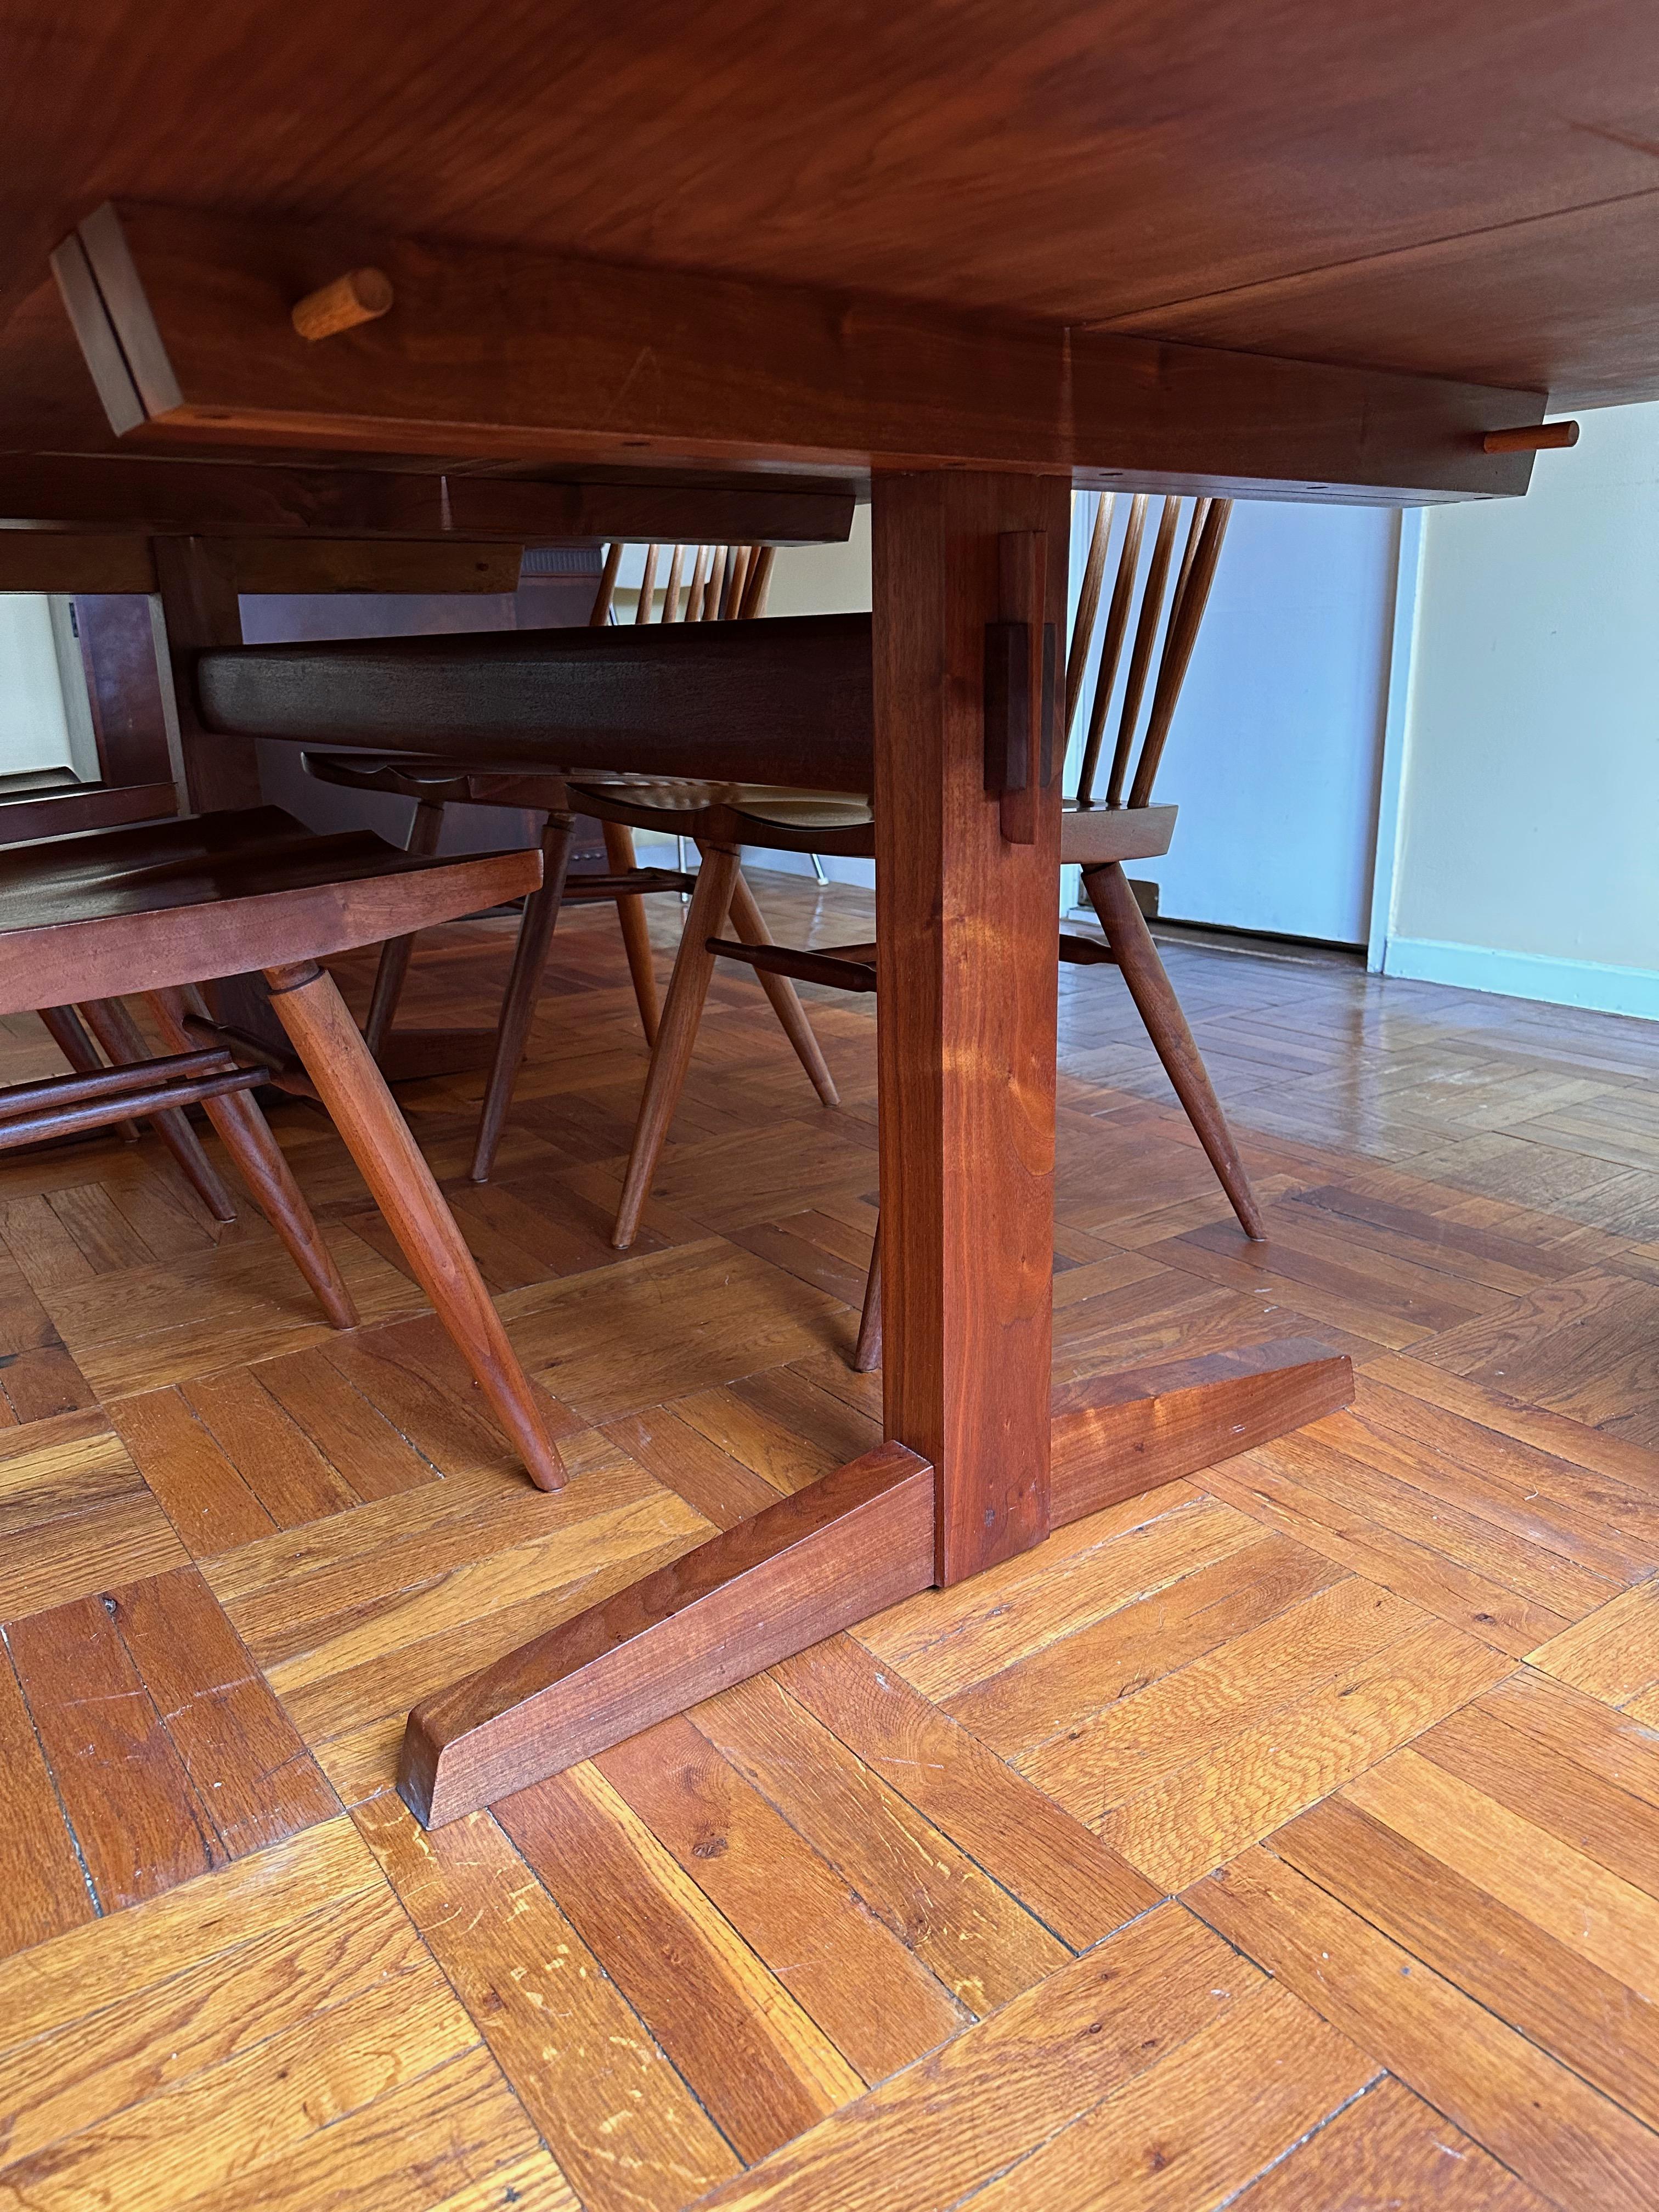 North American George Nakashima 8' Dining Table in Bookmatched Walnut with 5 Rosewood Butterfly